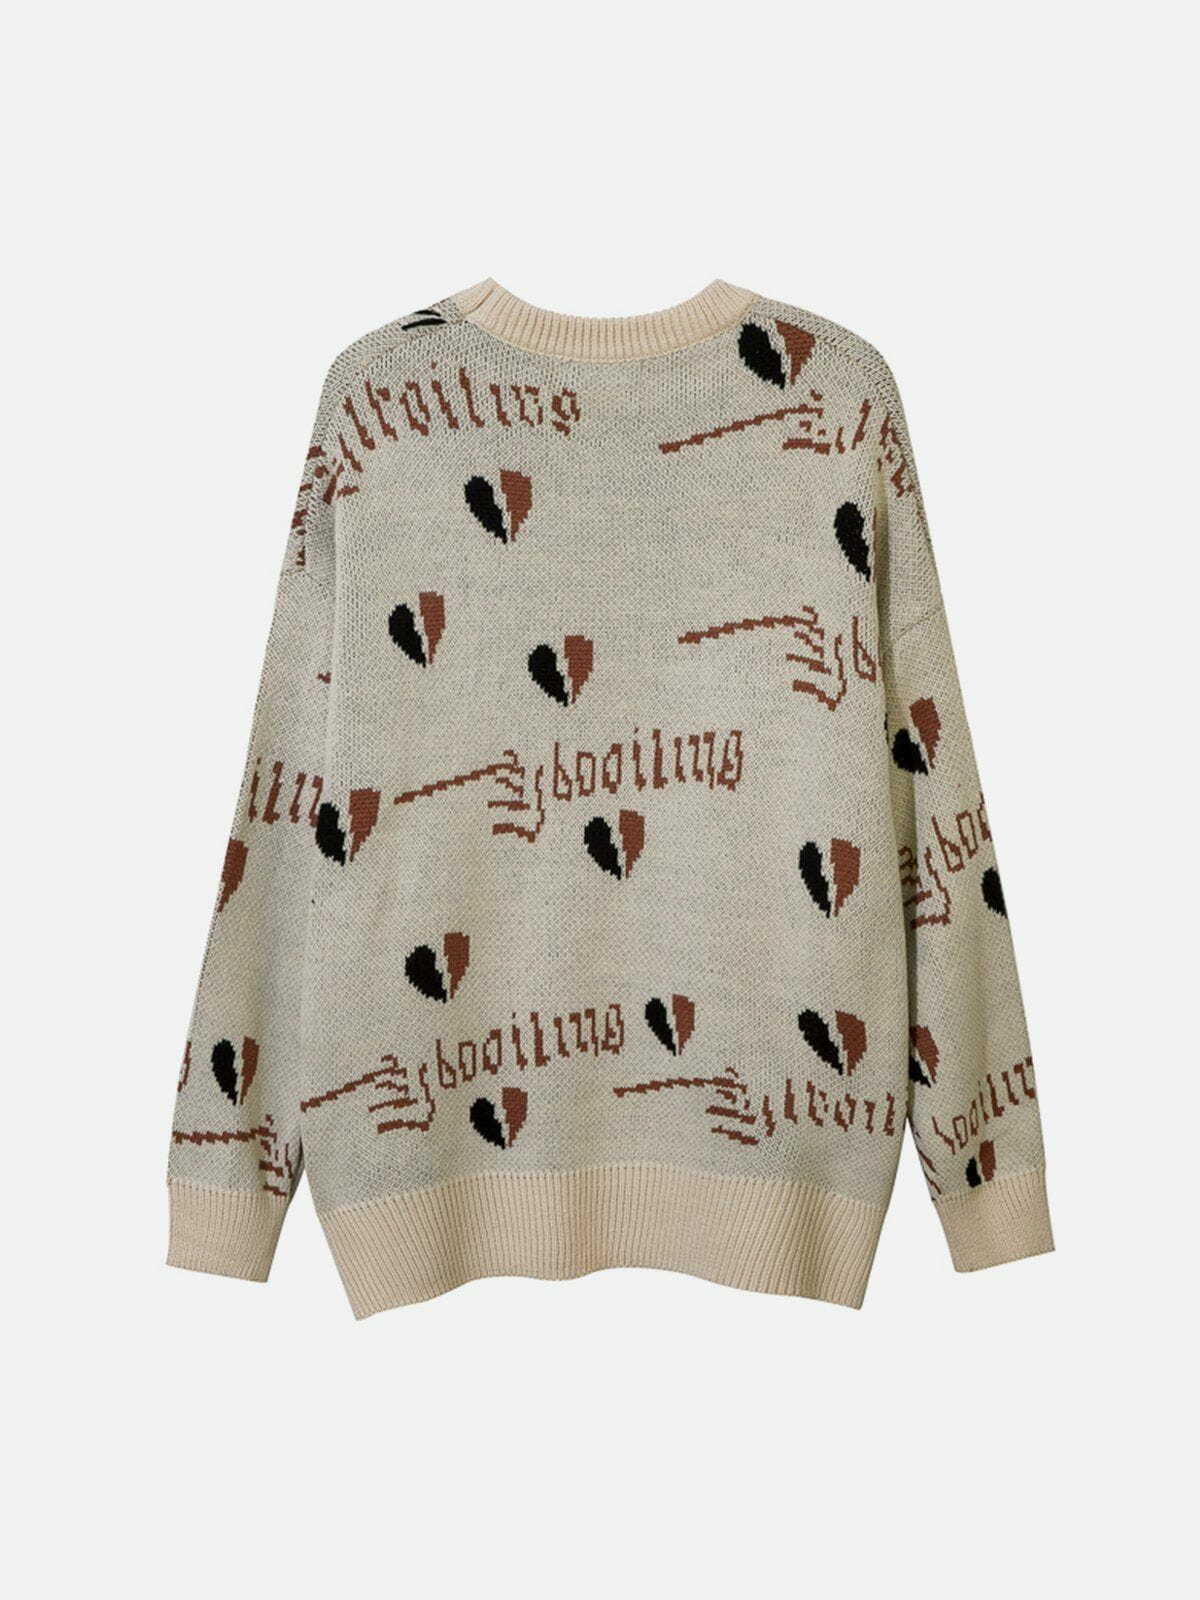 cupid embroidered sweater romantic & chic streetwear 7071